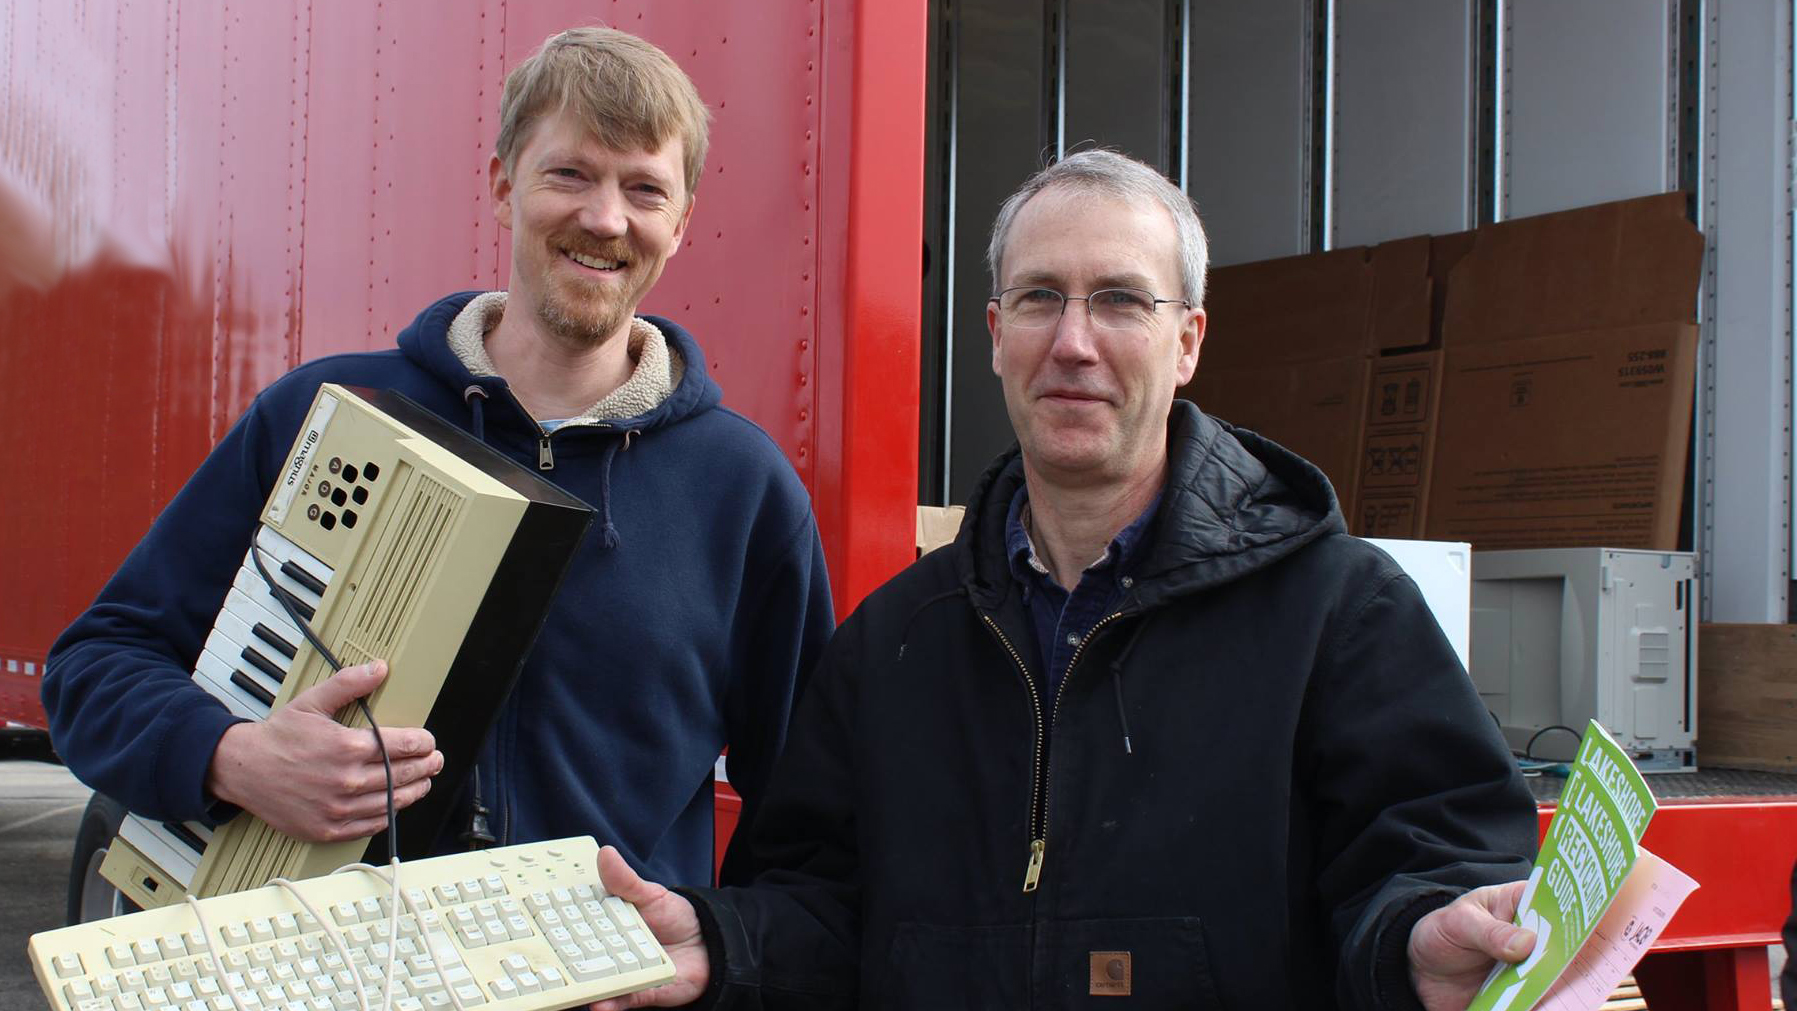 Two men holding old electronics in front of a red truck